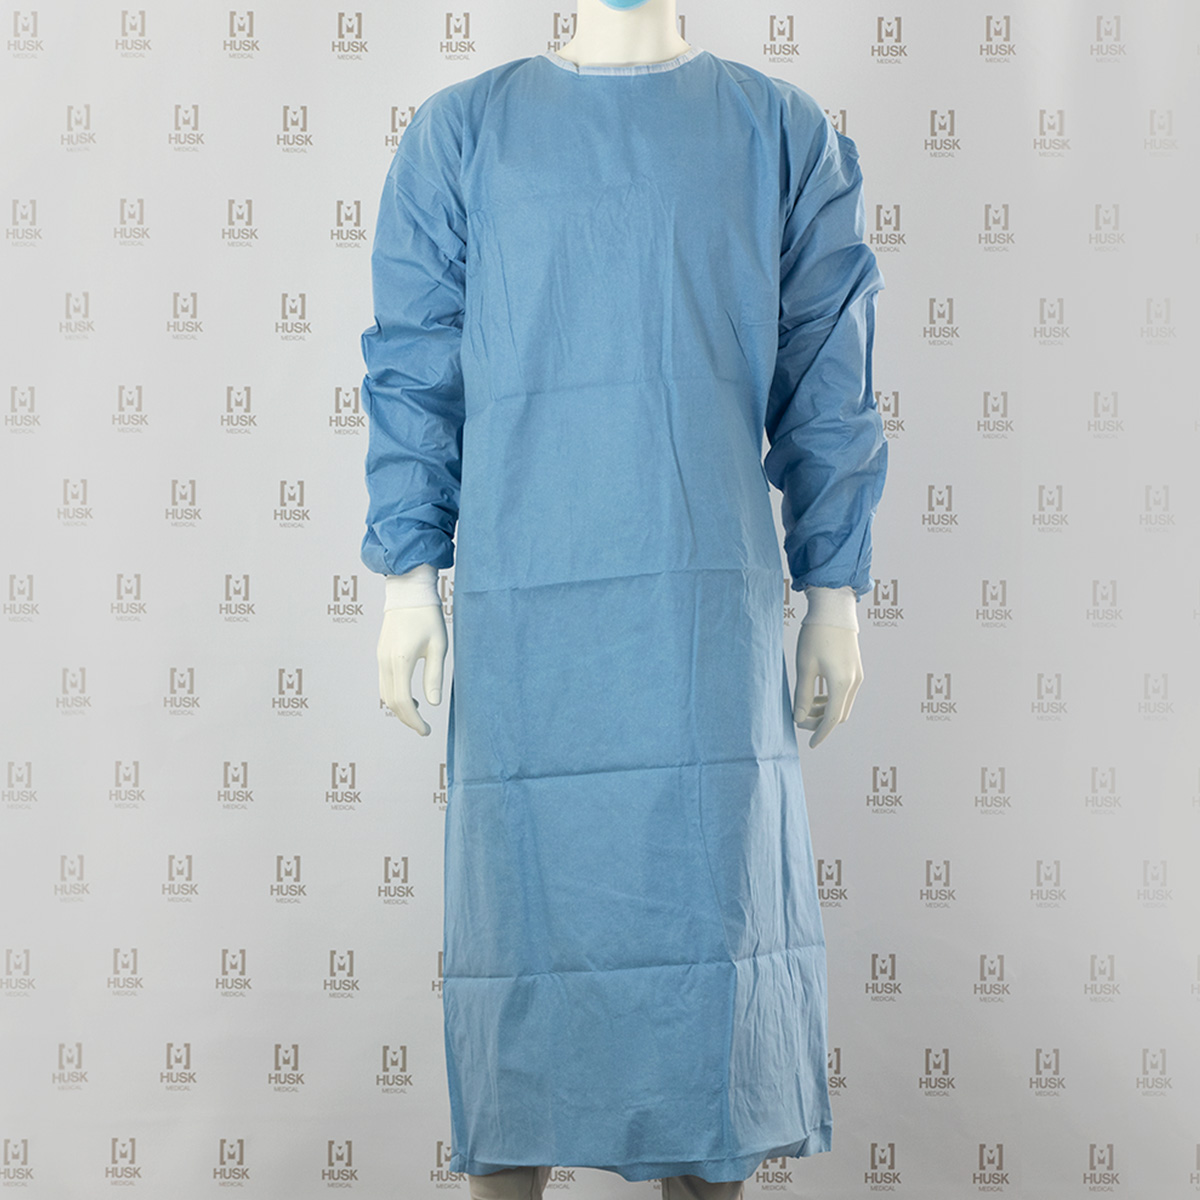 AAMI Rating Levels for Surgical Gowns and Drapes